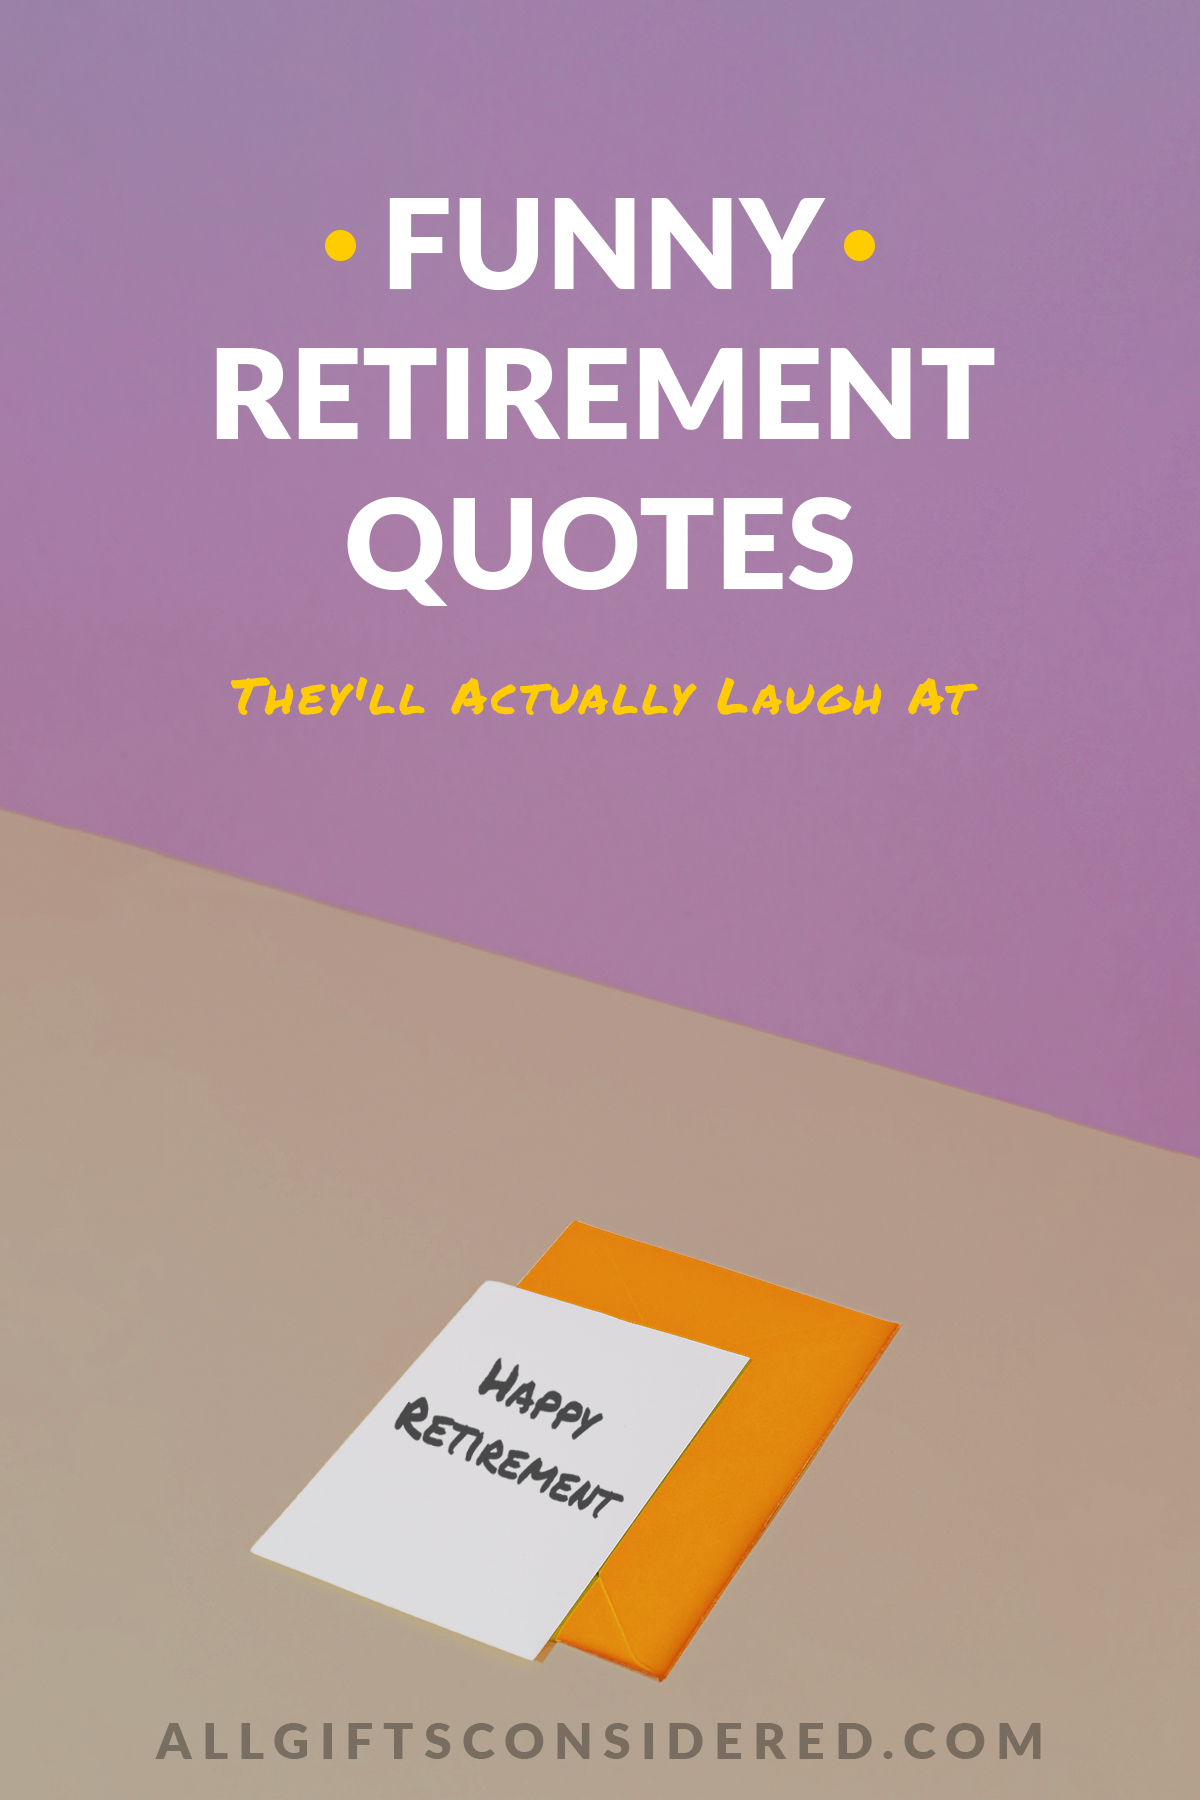 funny retirement quotes - feature image